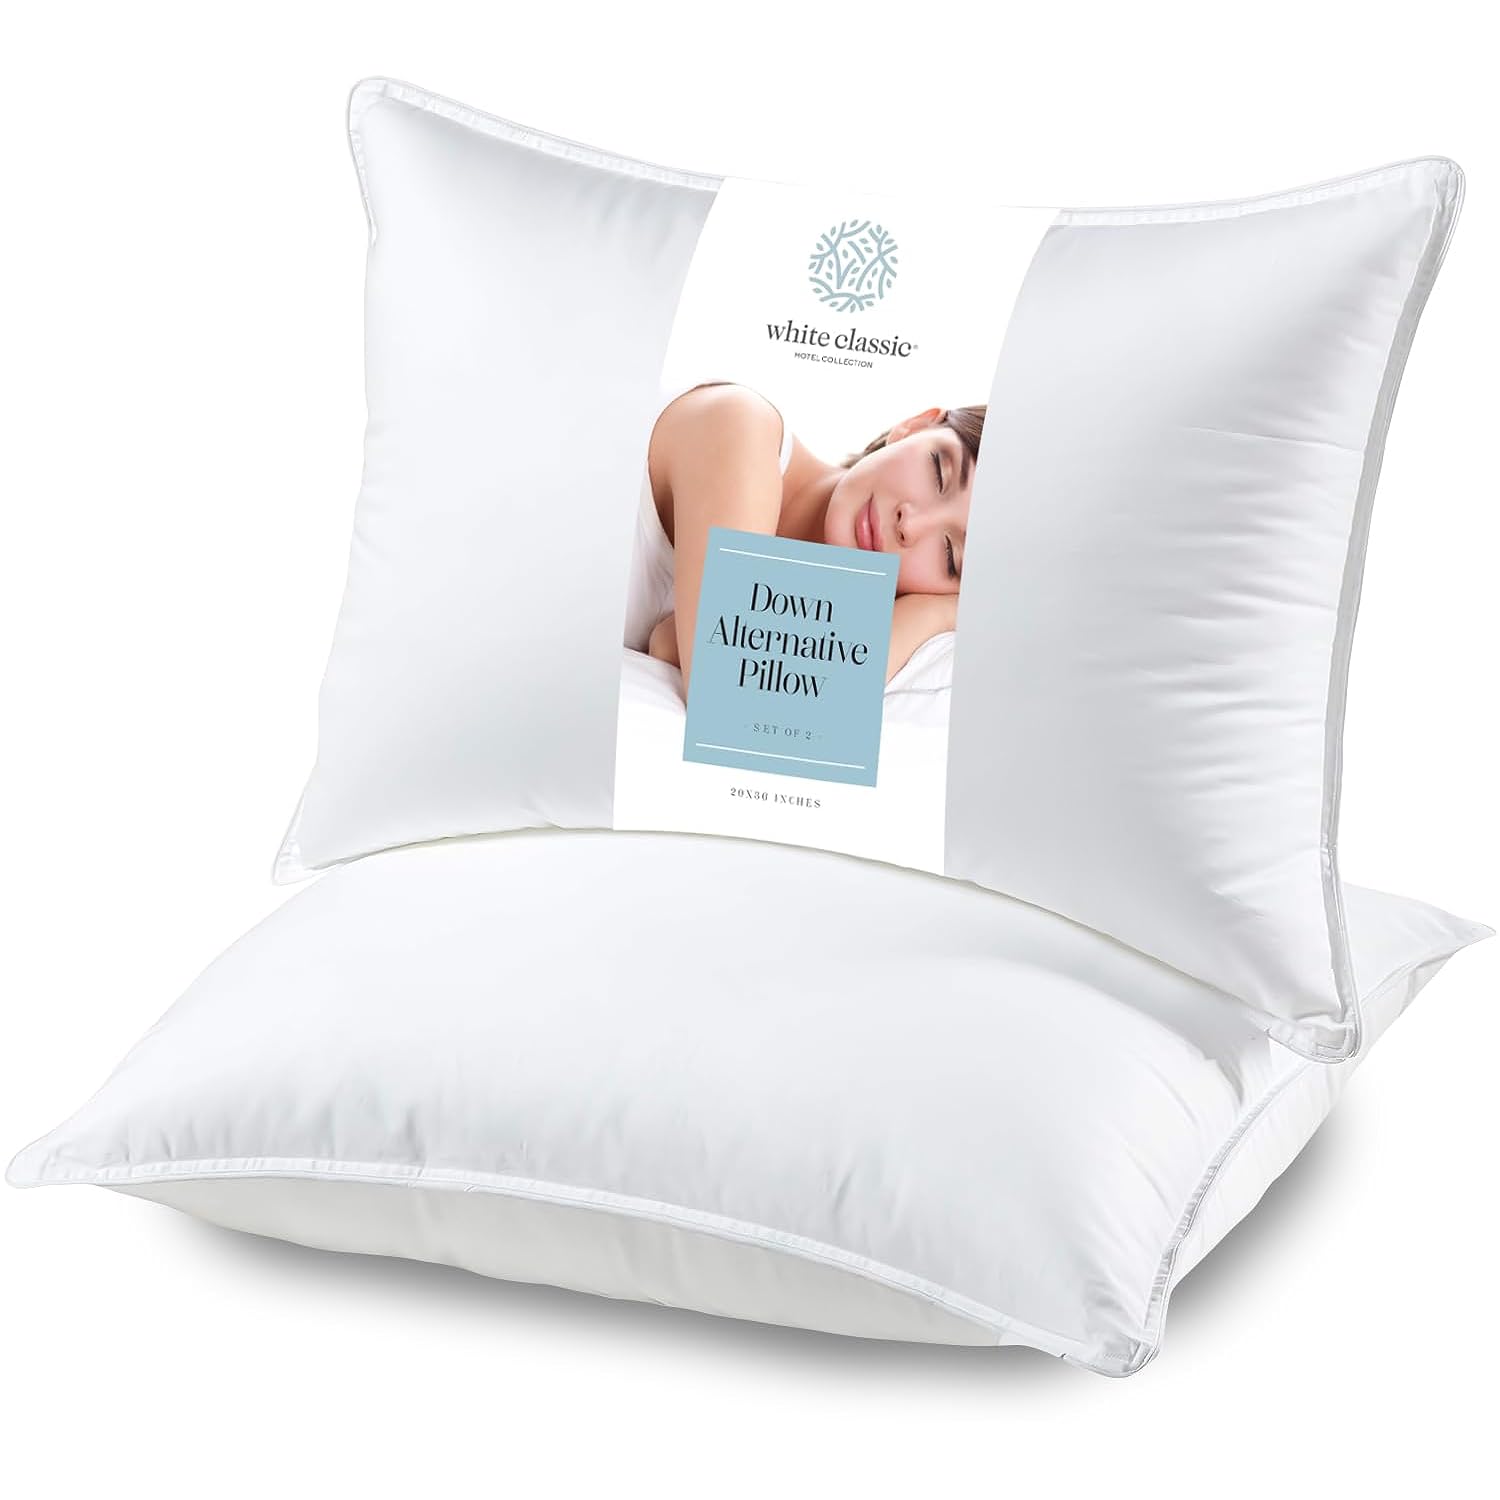 CozyLux Pillows King Size Set of 2, Hotel Quality Bed Pillows for Sleeping  2 Pack, Cooling Pillows for Side Back and Stomach Sleepers, Down